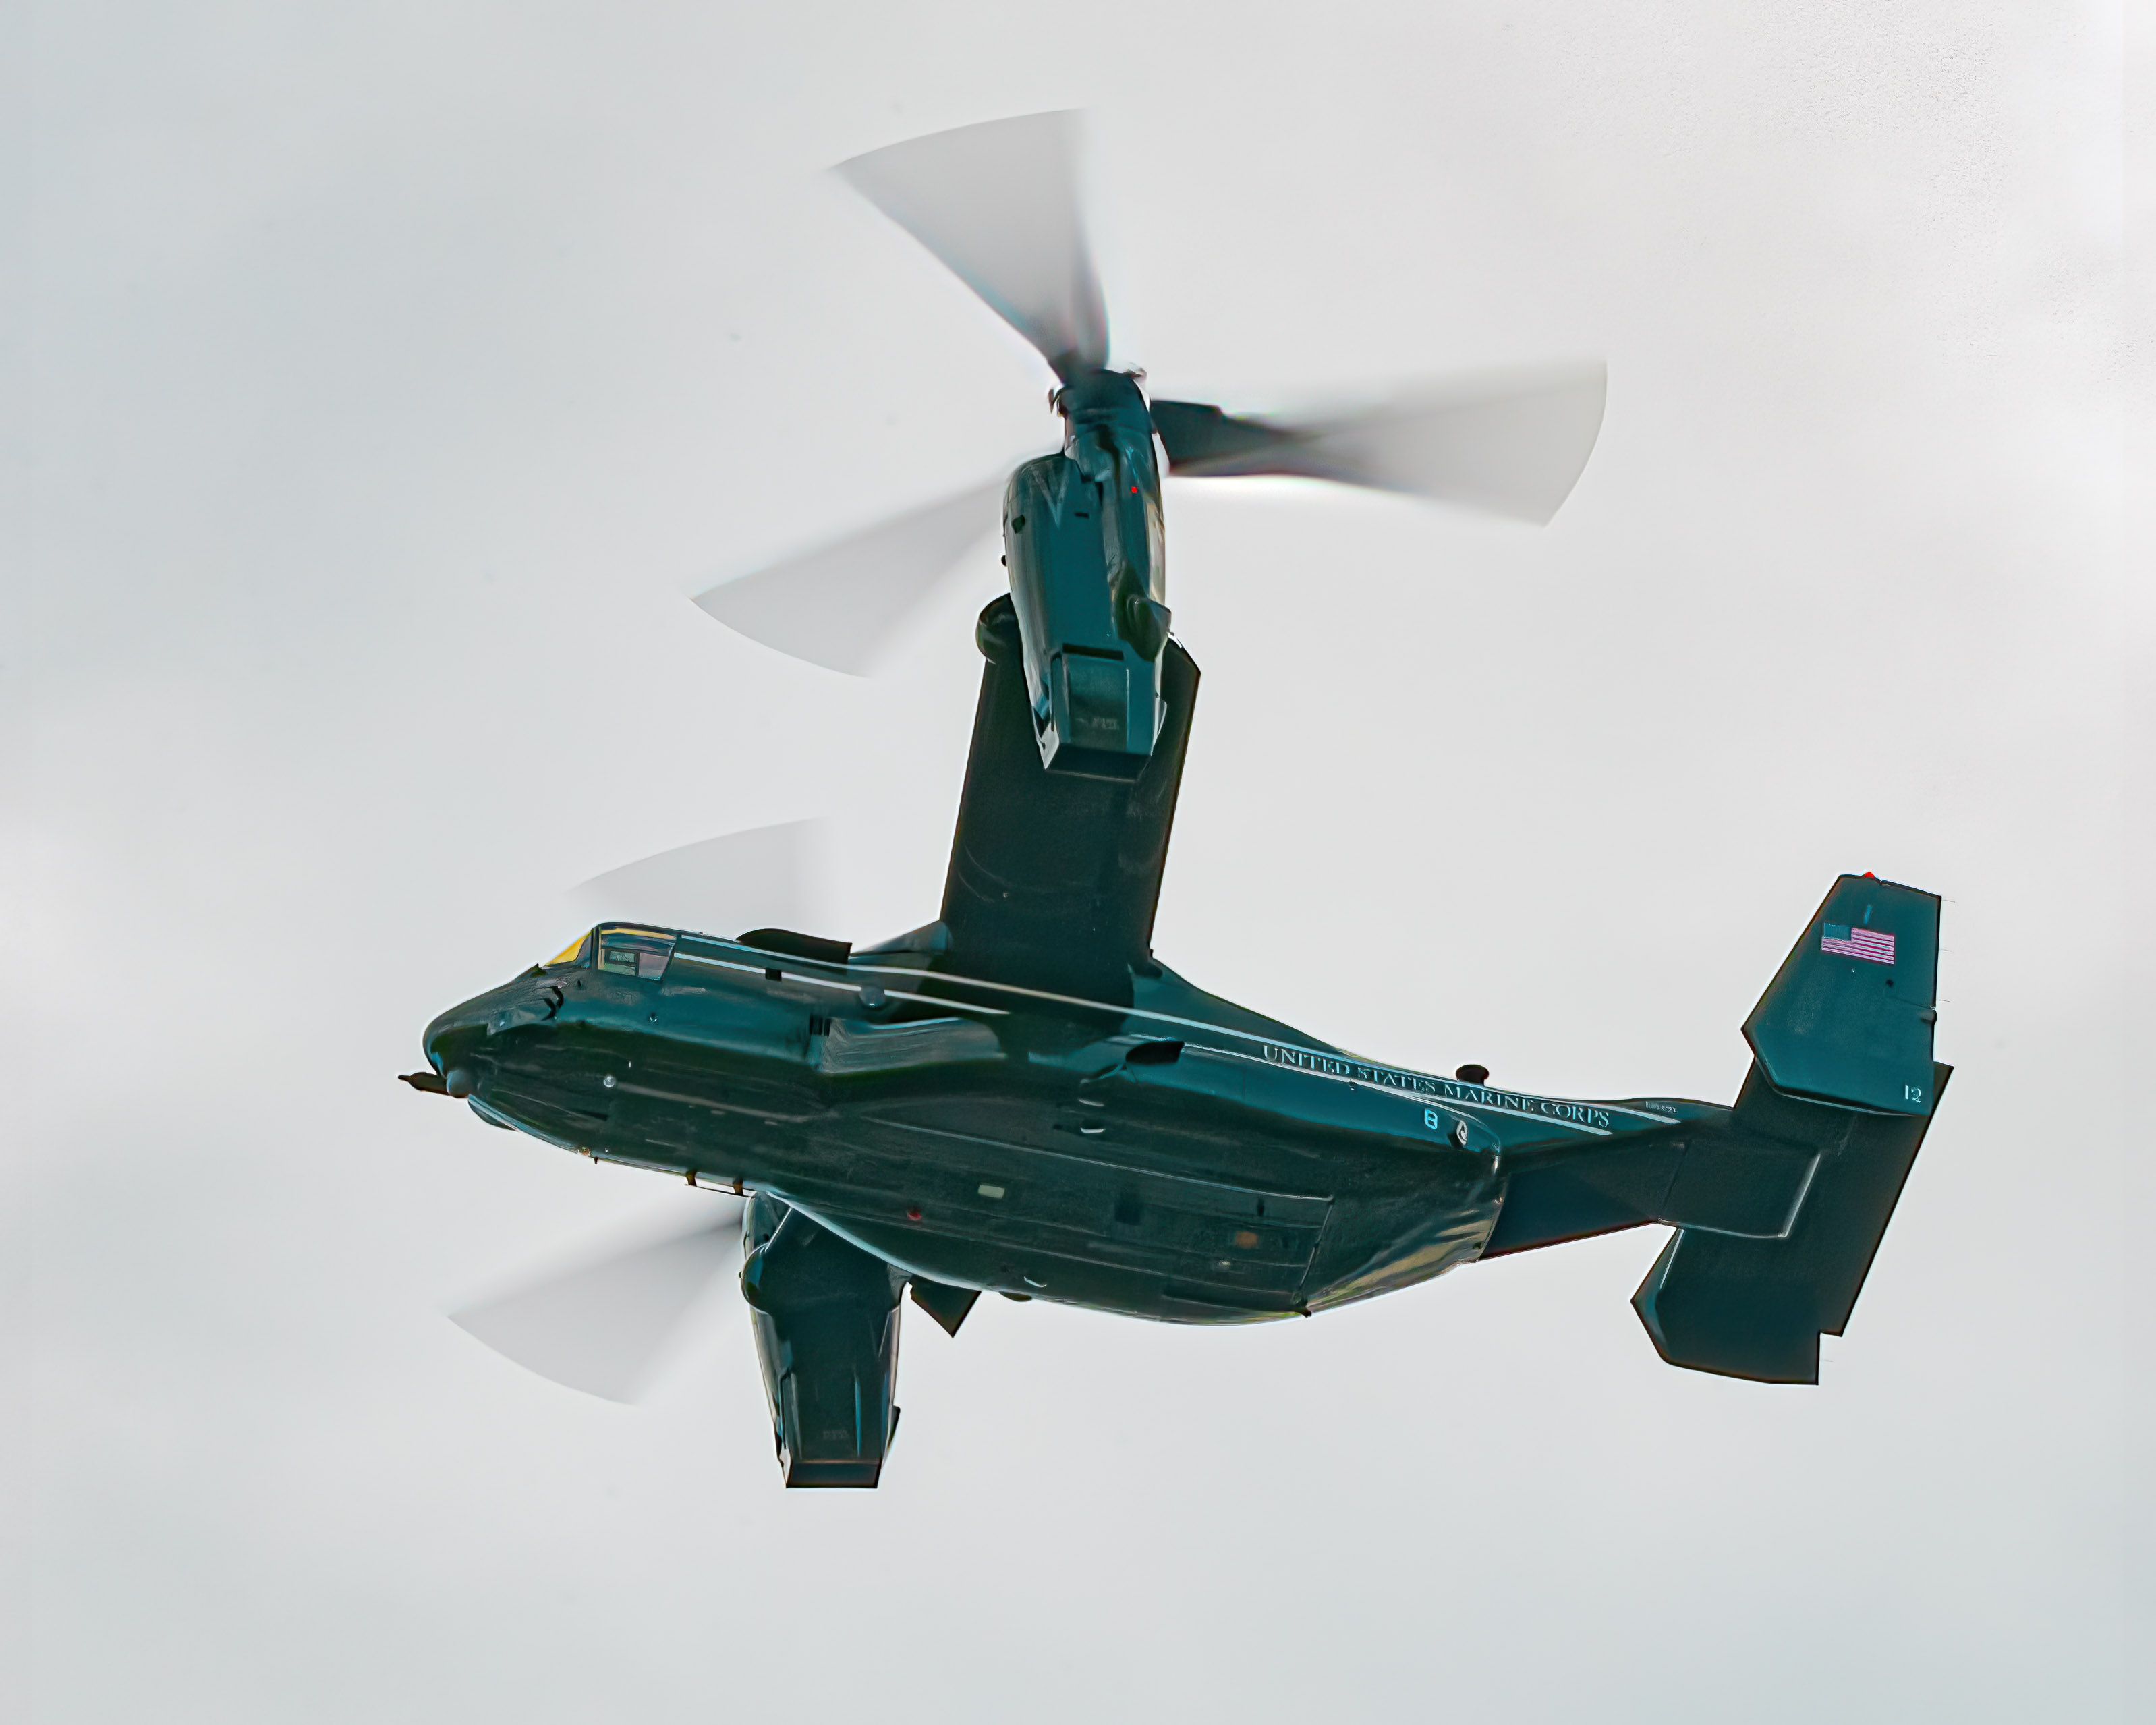 A USMC V-22 in helicopter mode flying in the sky.